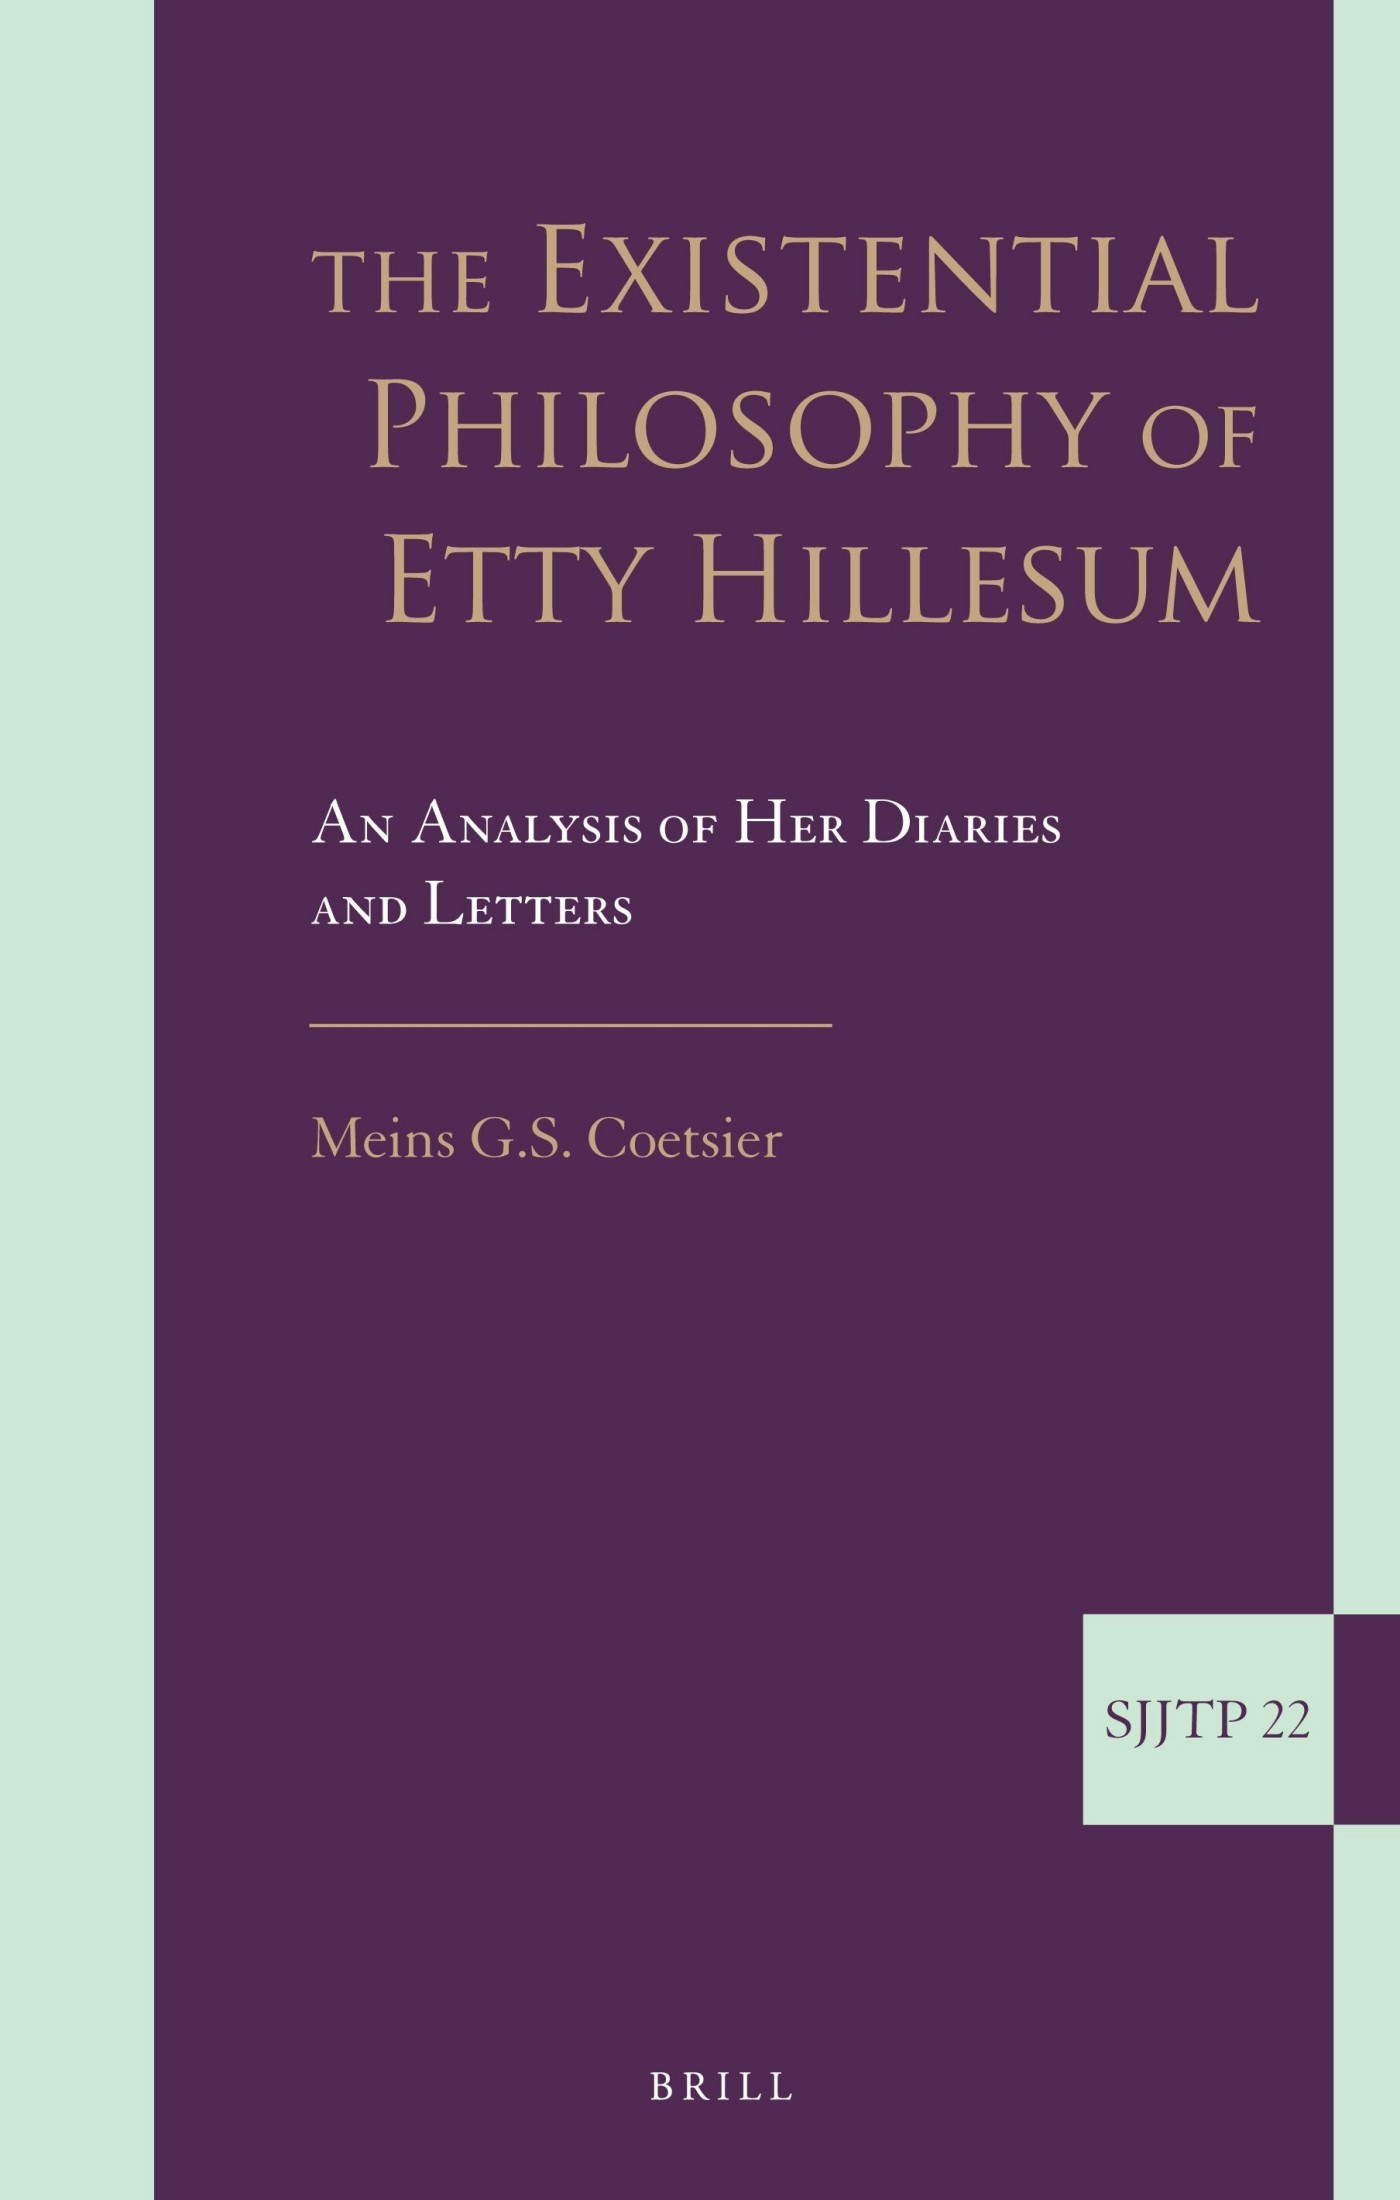 The Existential Philosophy of Etty Hillesum: An Analysis of Her Diaries and Letters